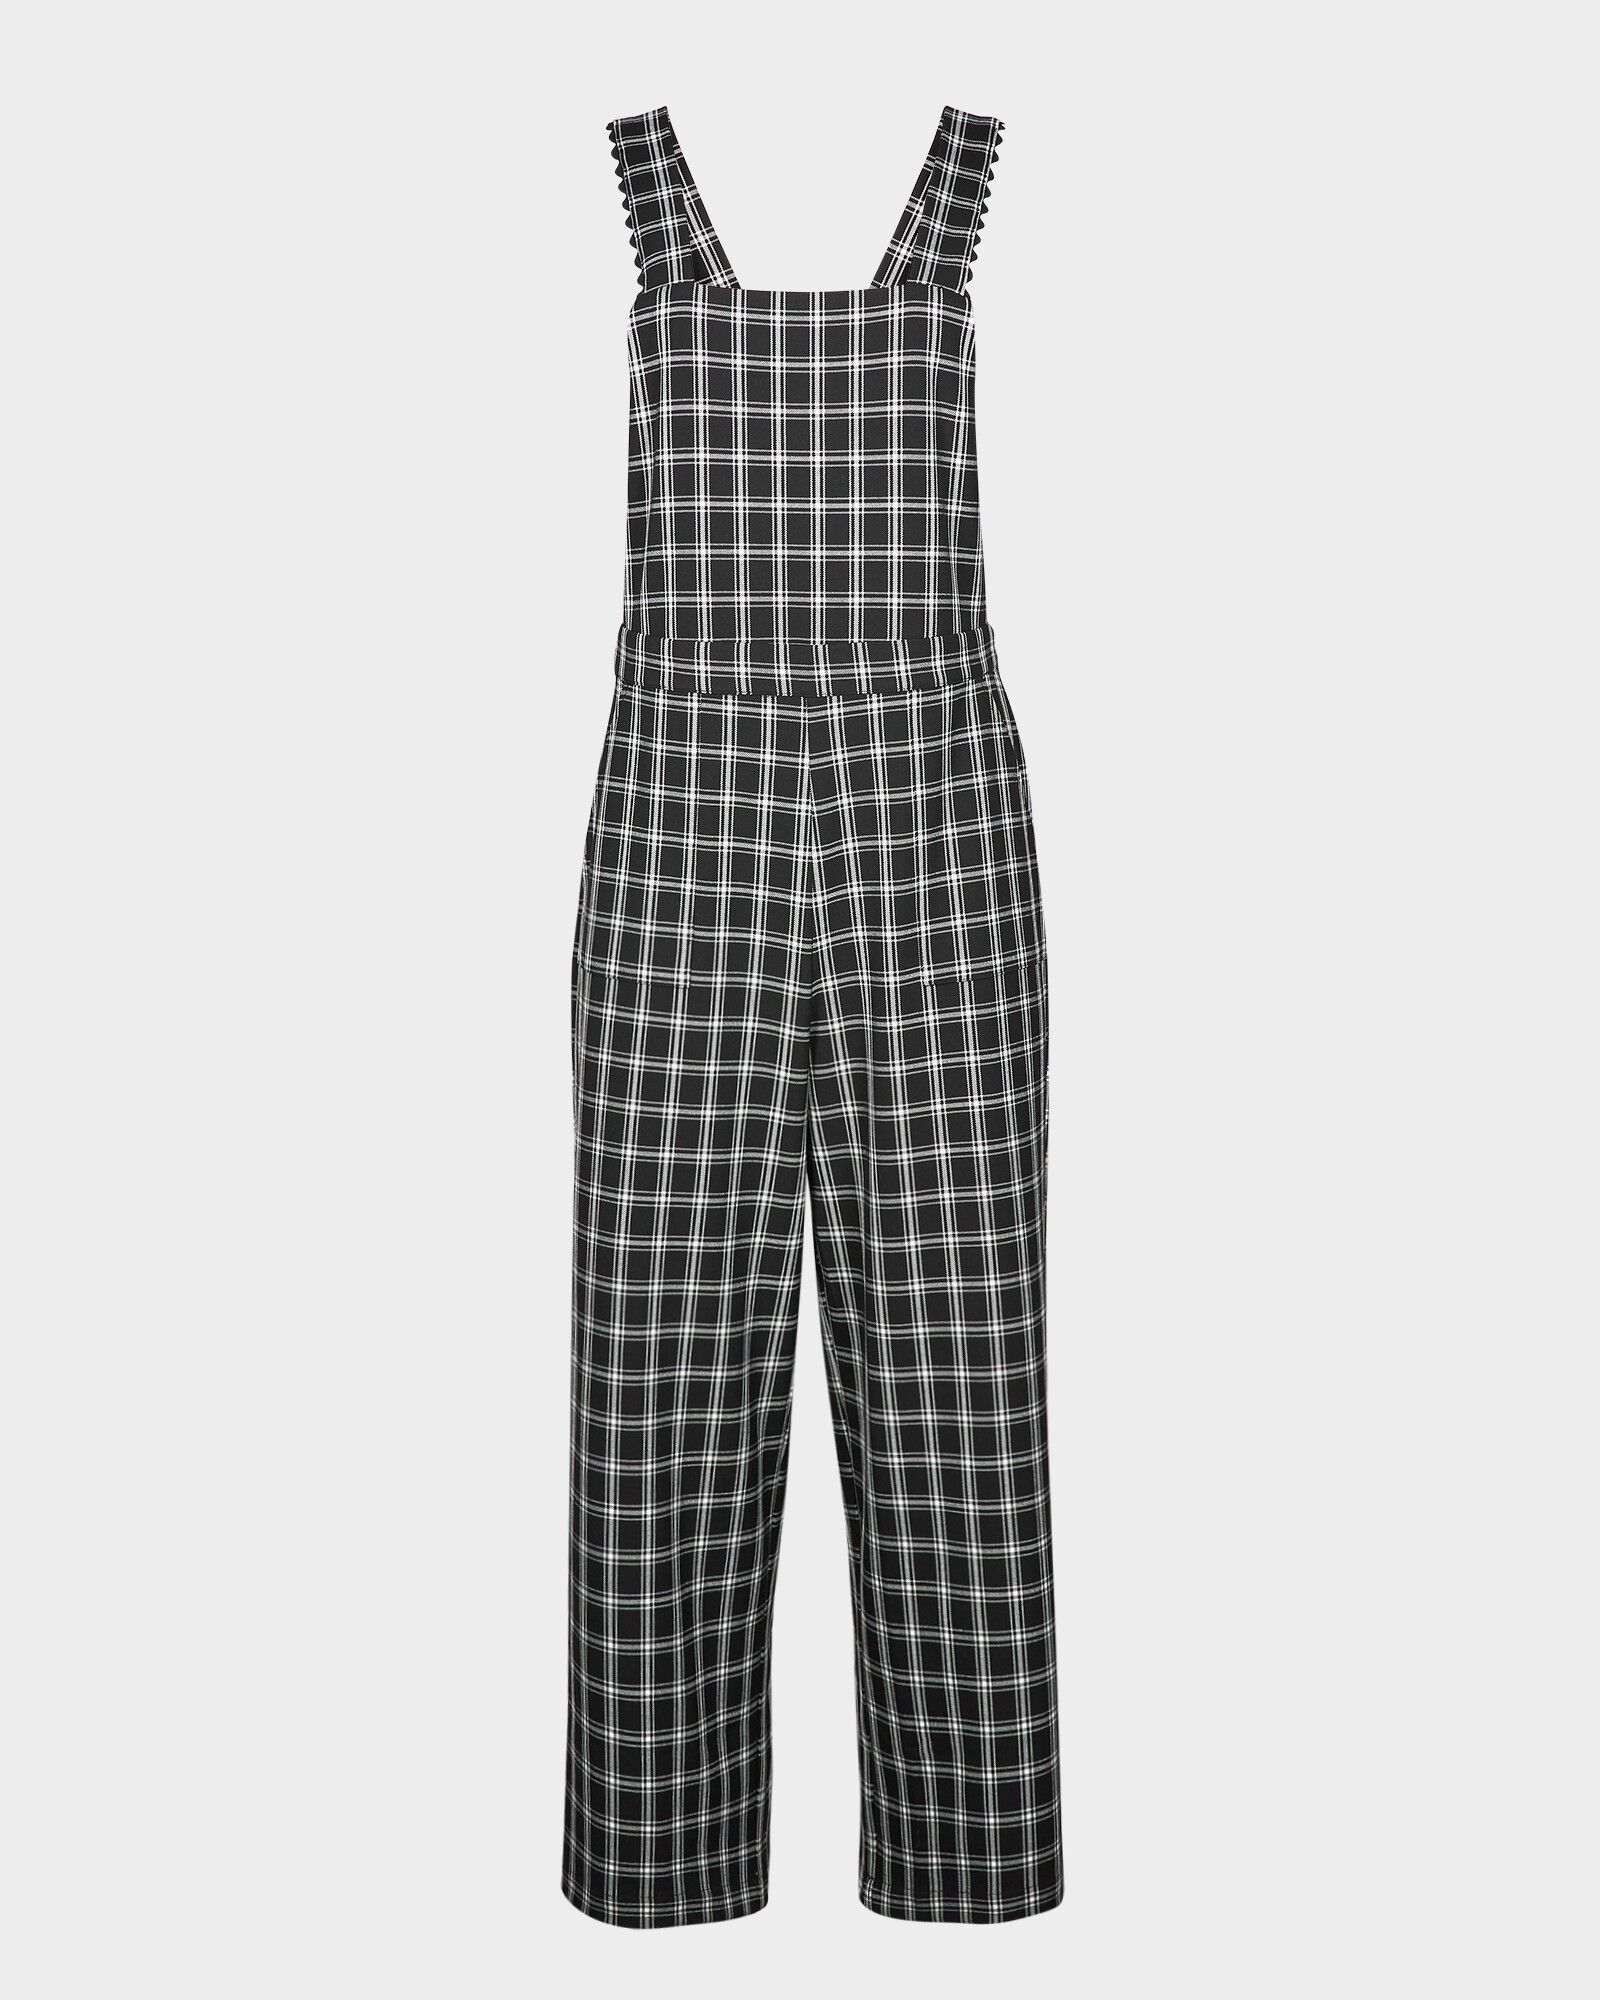 Checked Woven & Lace Trim Black Dungaree Jumpsuit | Oliver Bonas